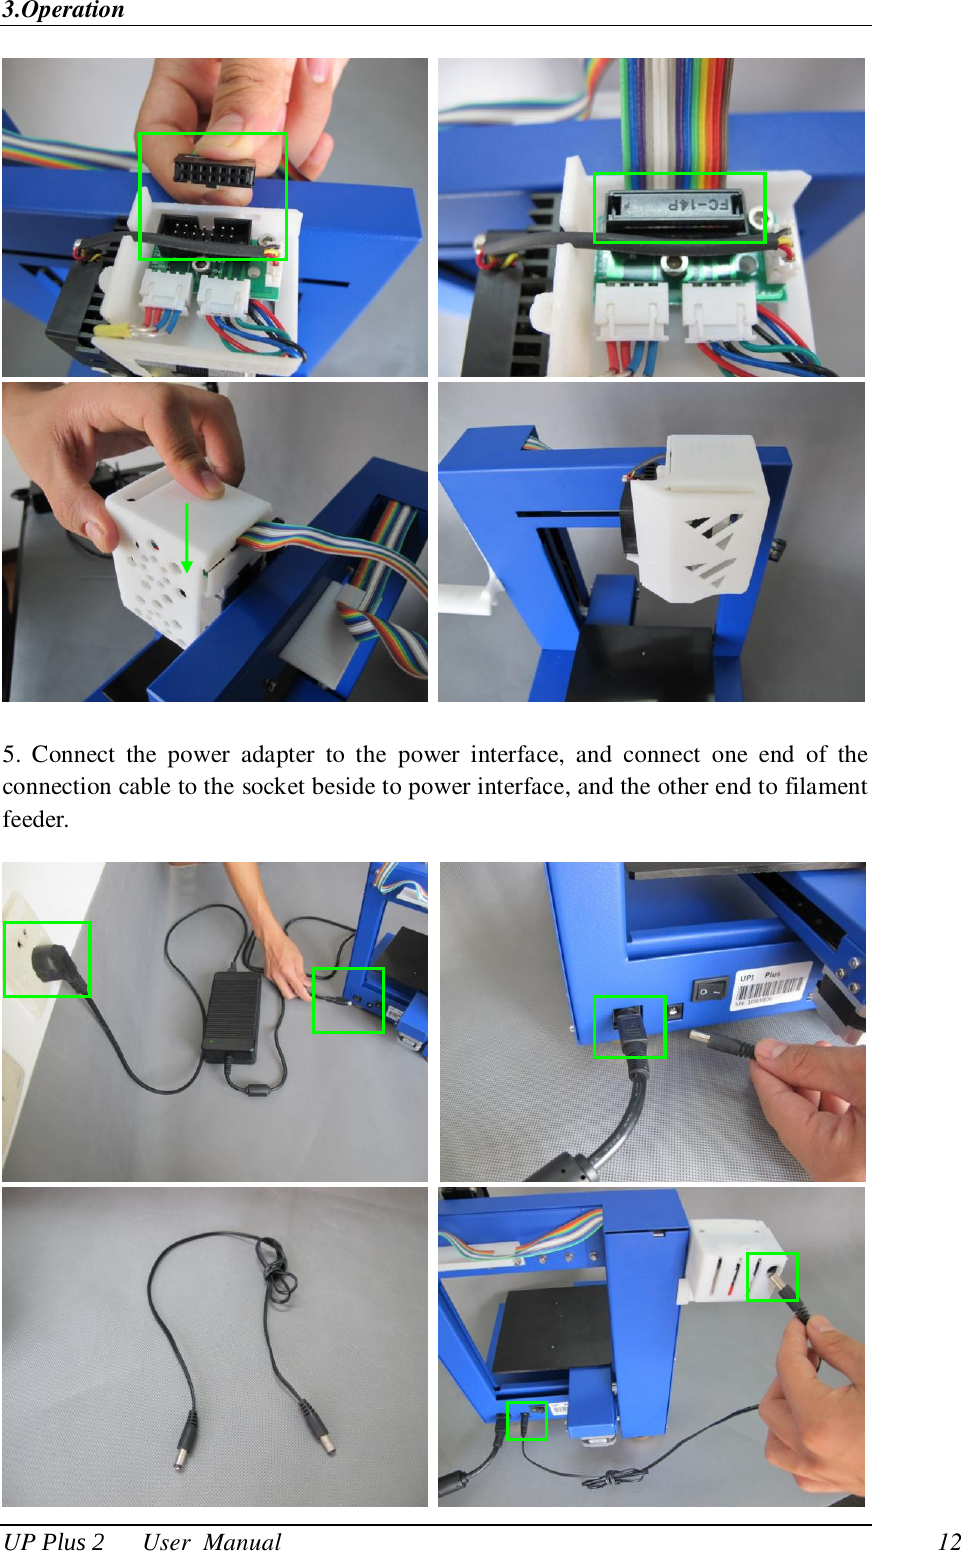 3.Operation UP Plus 2      User  Manual                                12        5.  Connect  the  power  adapter  to  the  power  interface, and  connect  one  end  of  the connection cable to the socket beside to power interface, and the other end to filament feeder.       